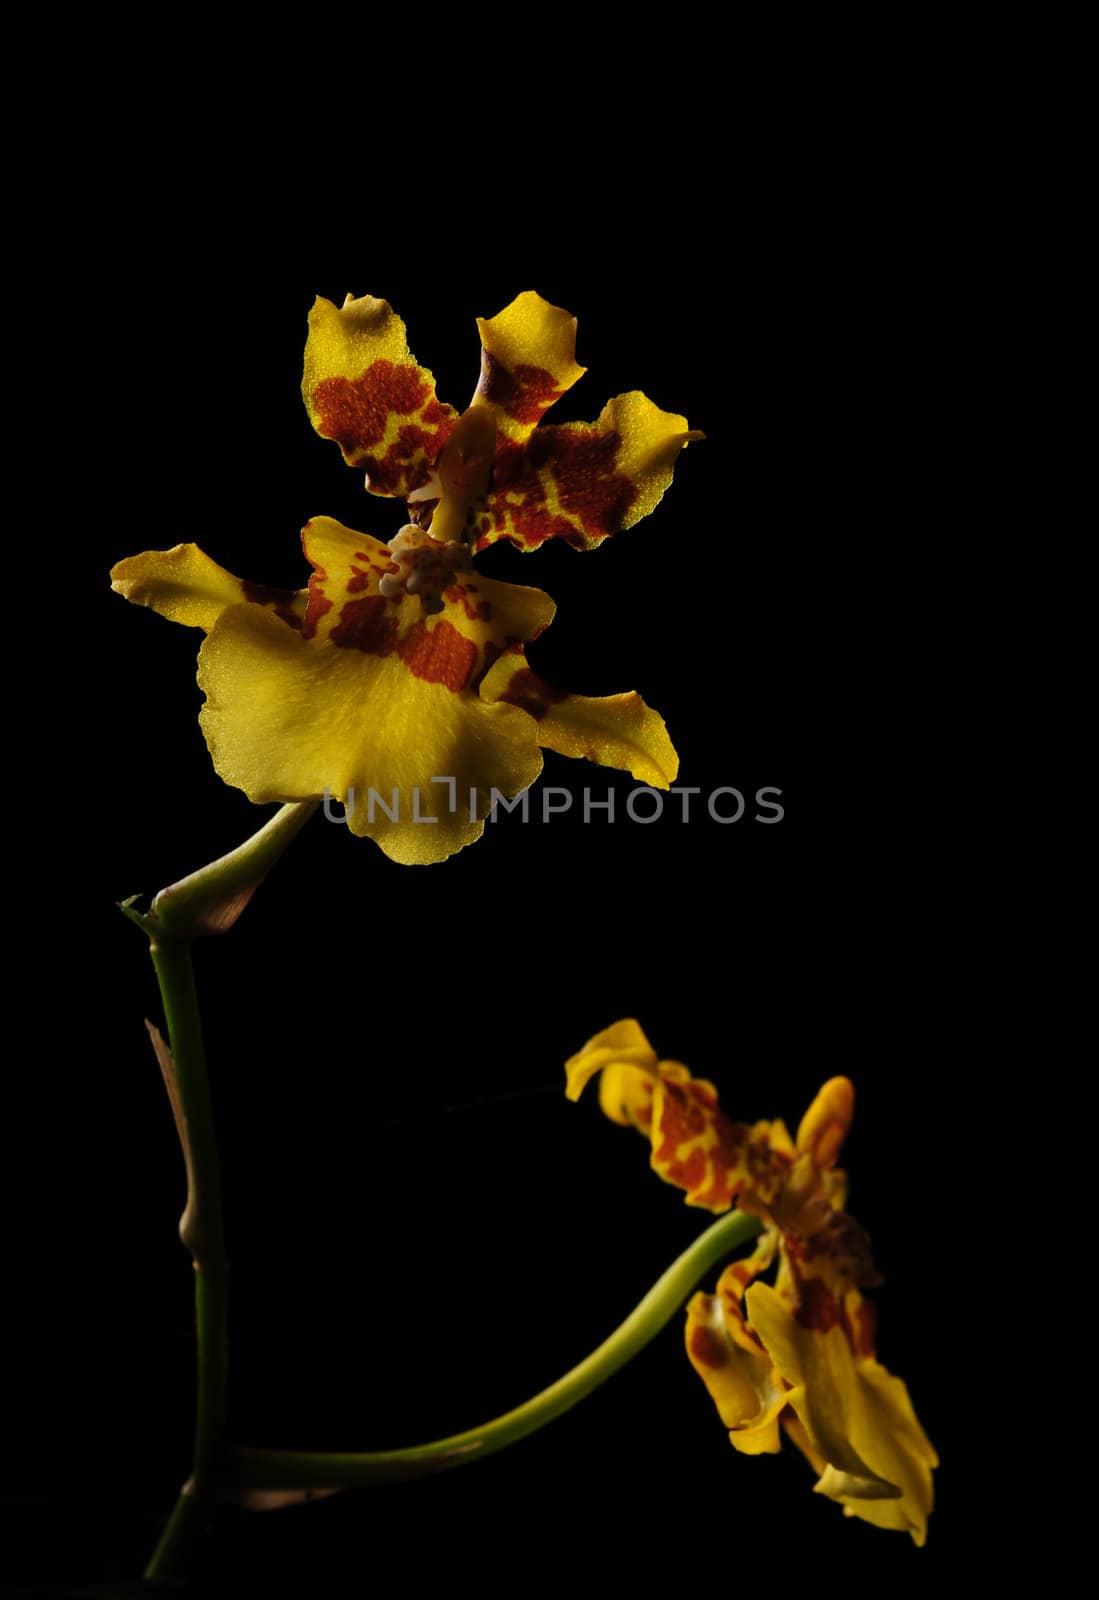 Orchid flowers isolated on black background by ftlaudgirl